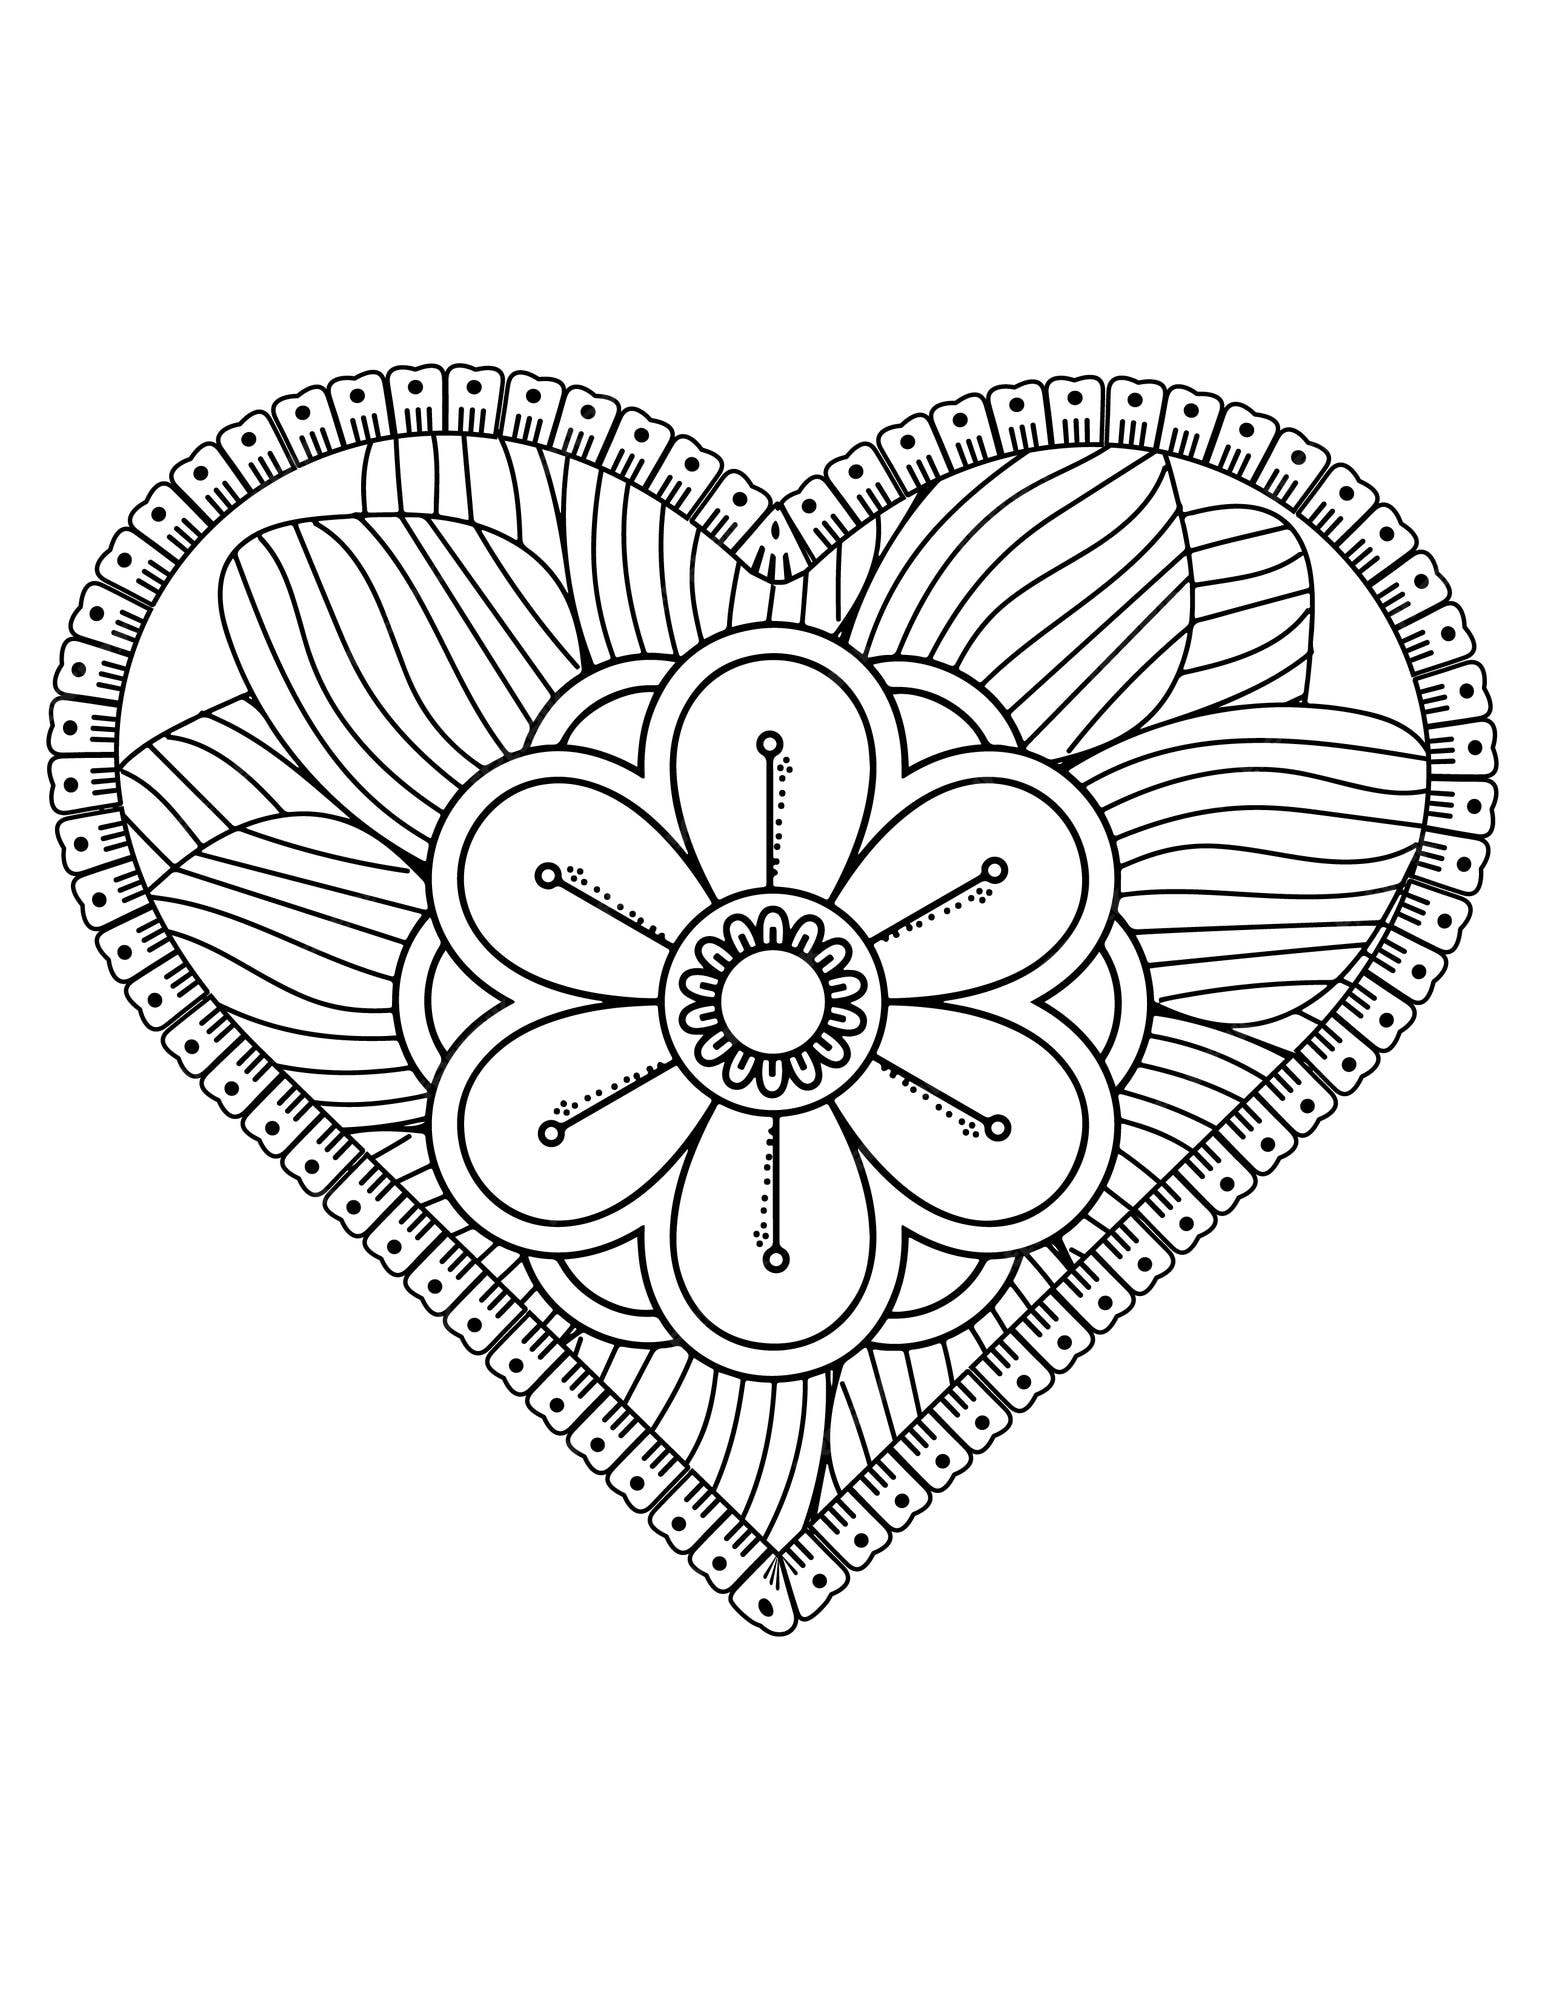 Premium vector valentine pattern design valentine heart coloring page for adult and kids hand drawn flower